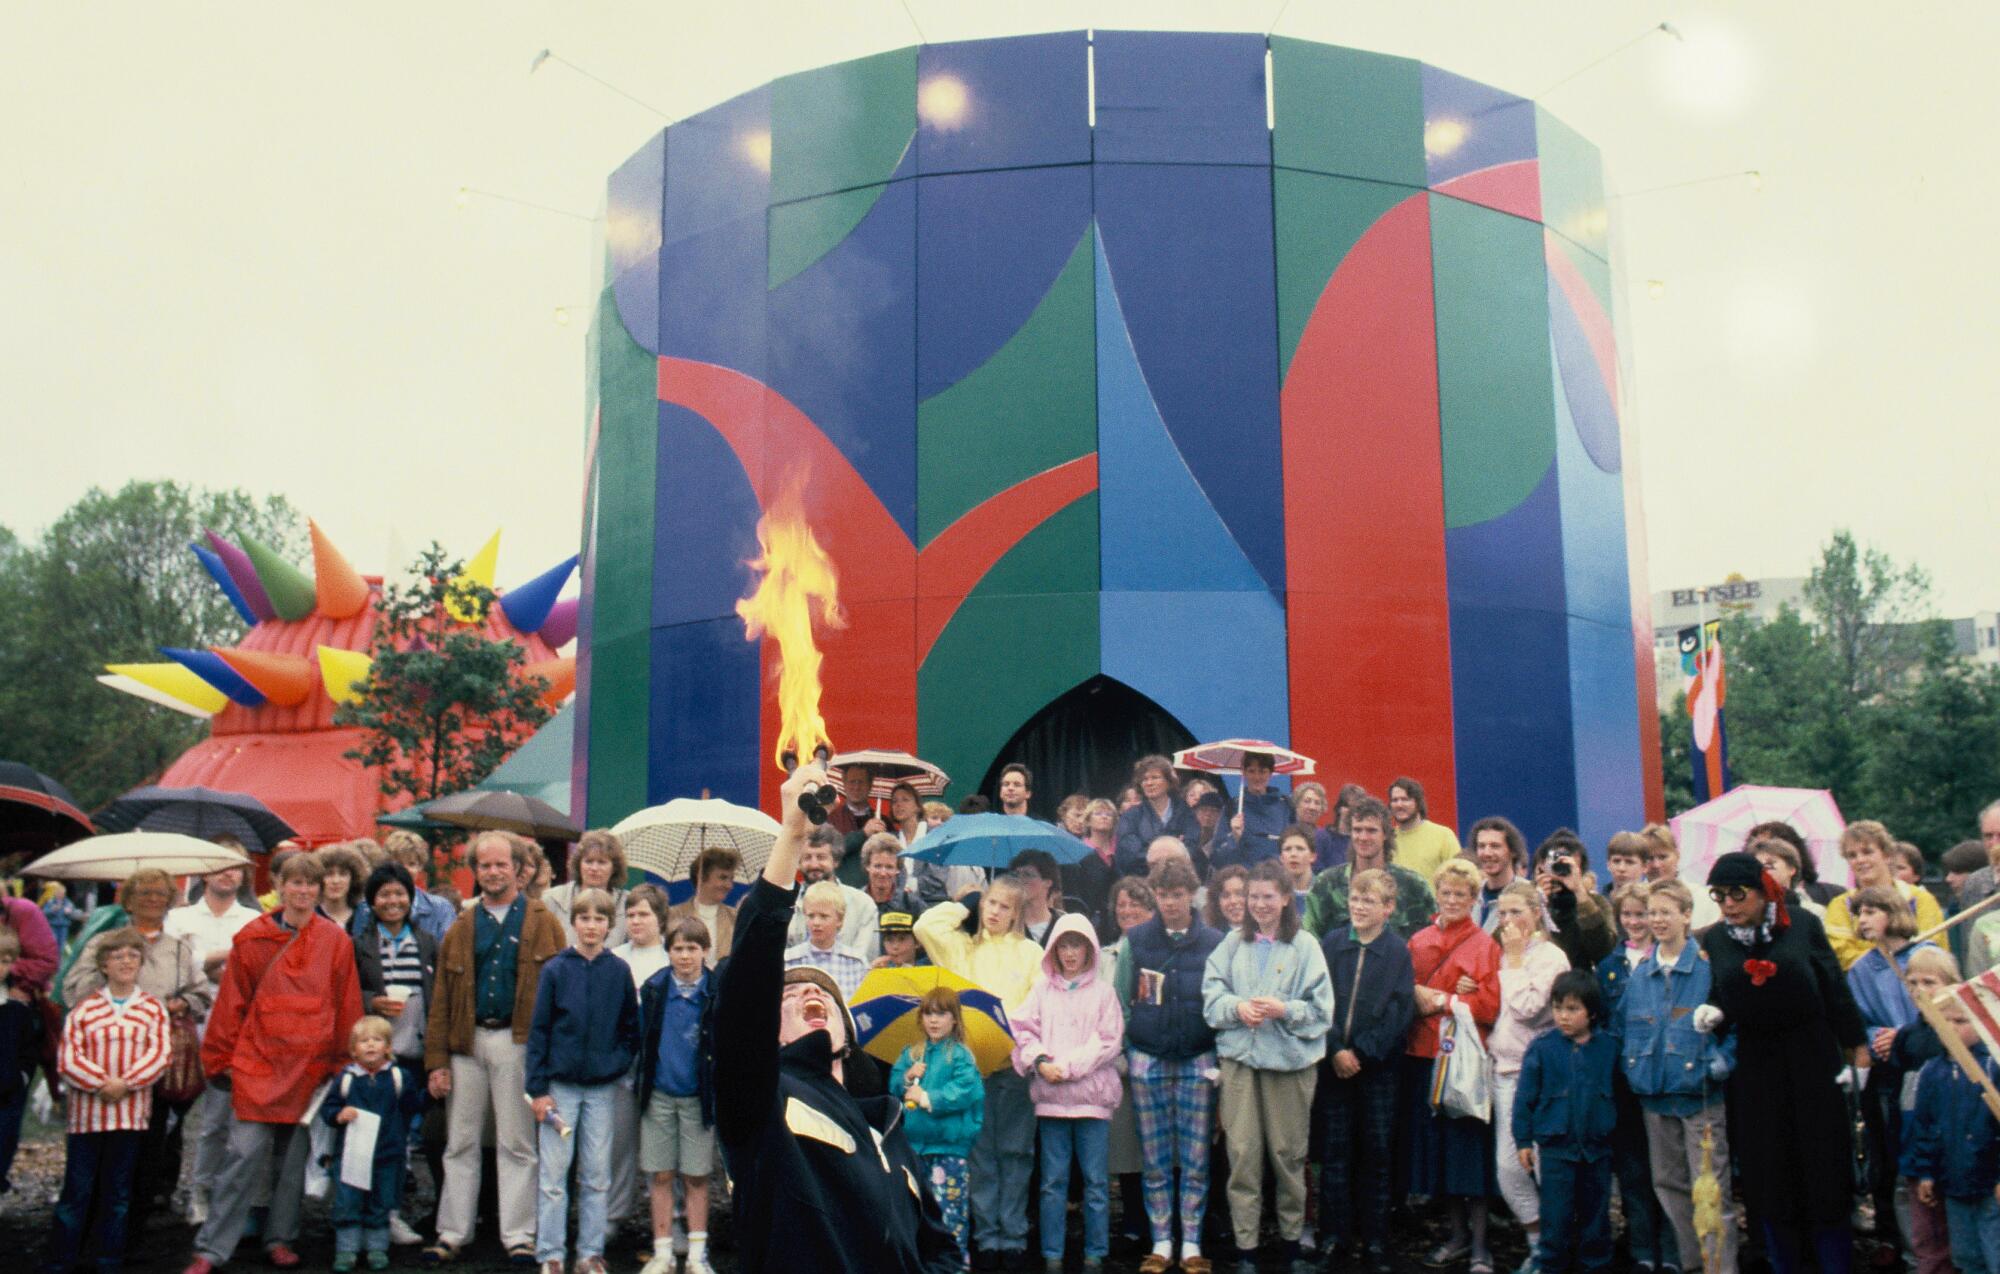 A crowd watches a fire-eating performer outside of a colorfully decorated round structure.